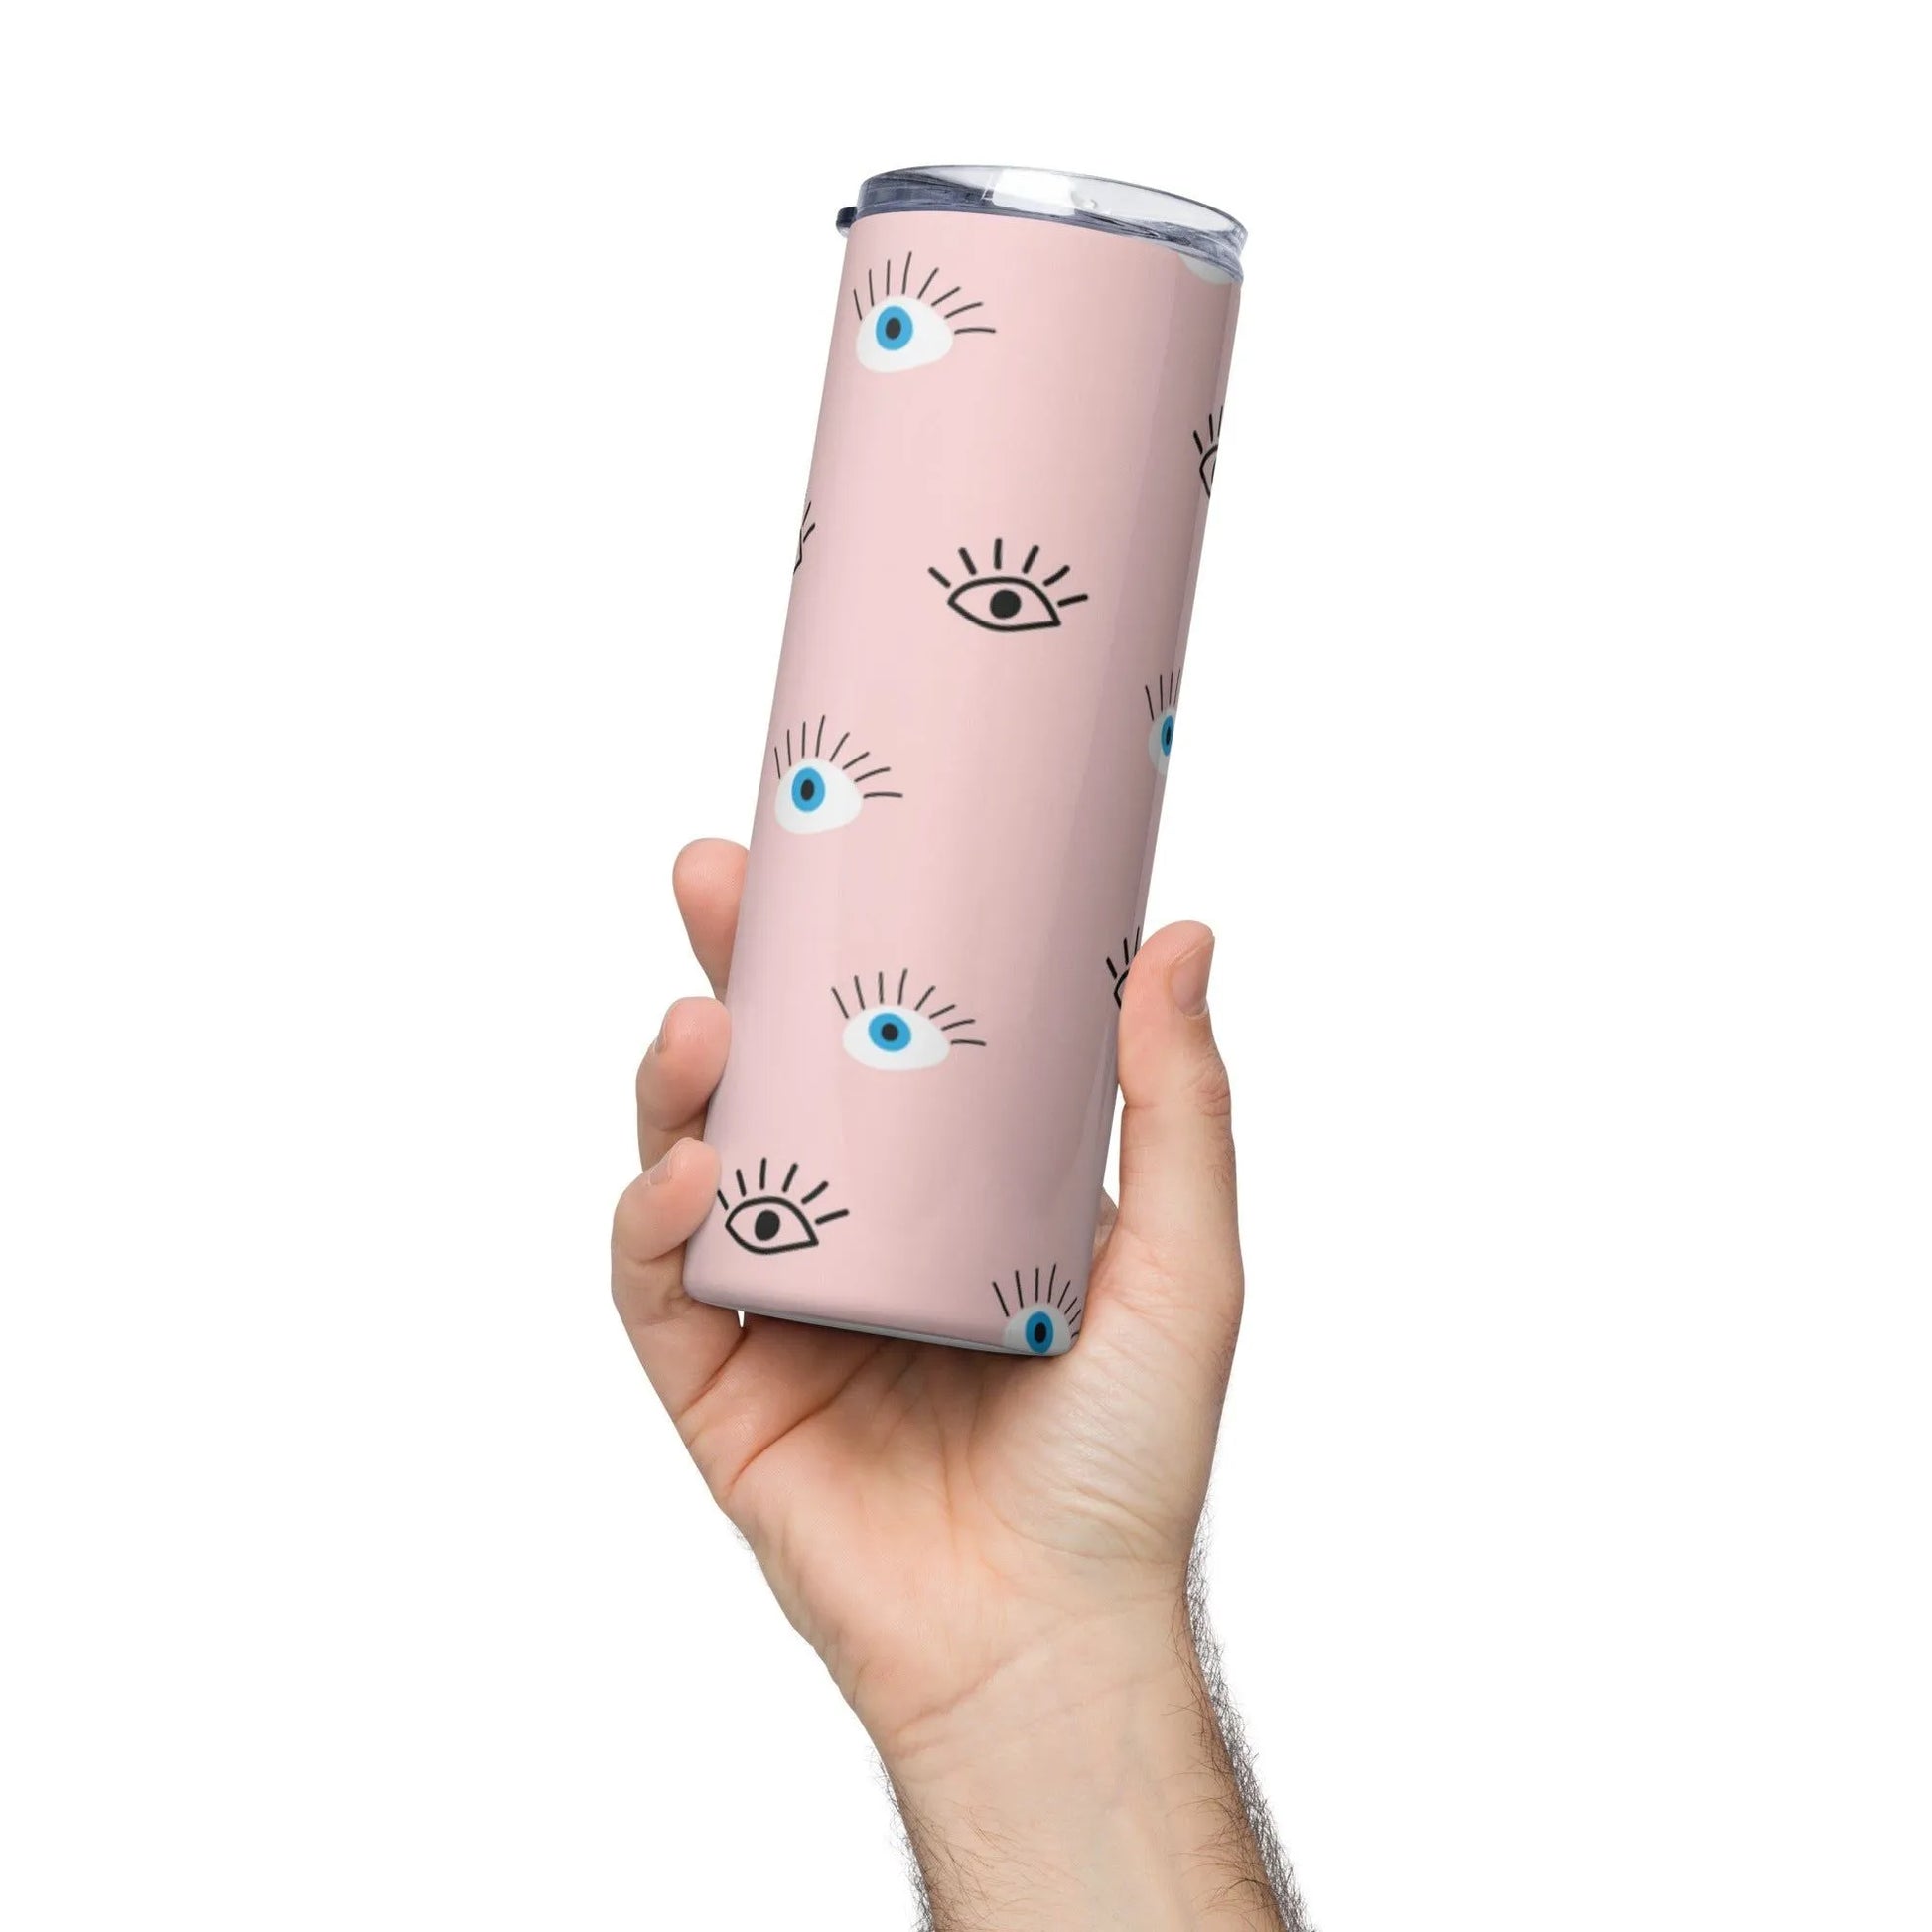 Evil Eye Protection stainless steel eco friendly reusable earth conscious tumbler with metal straw Rebel Girl Rampage